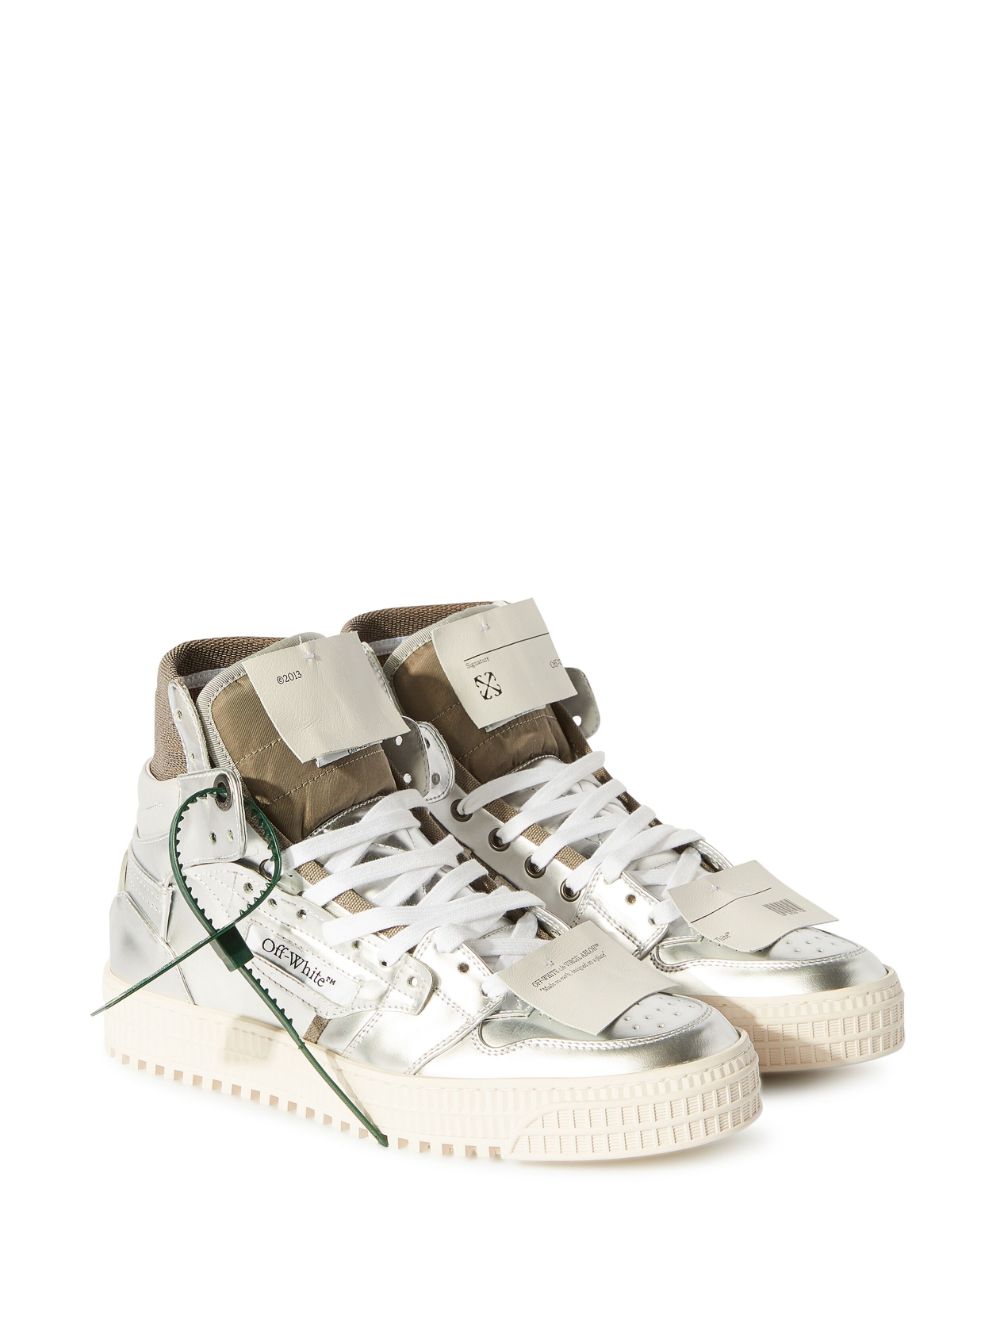 Off-White Off-Court 3.0 sneakers - Zilver